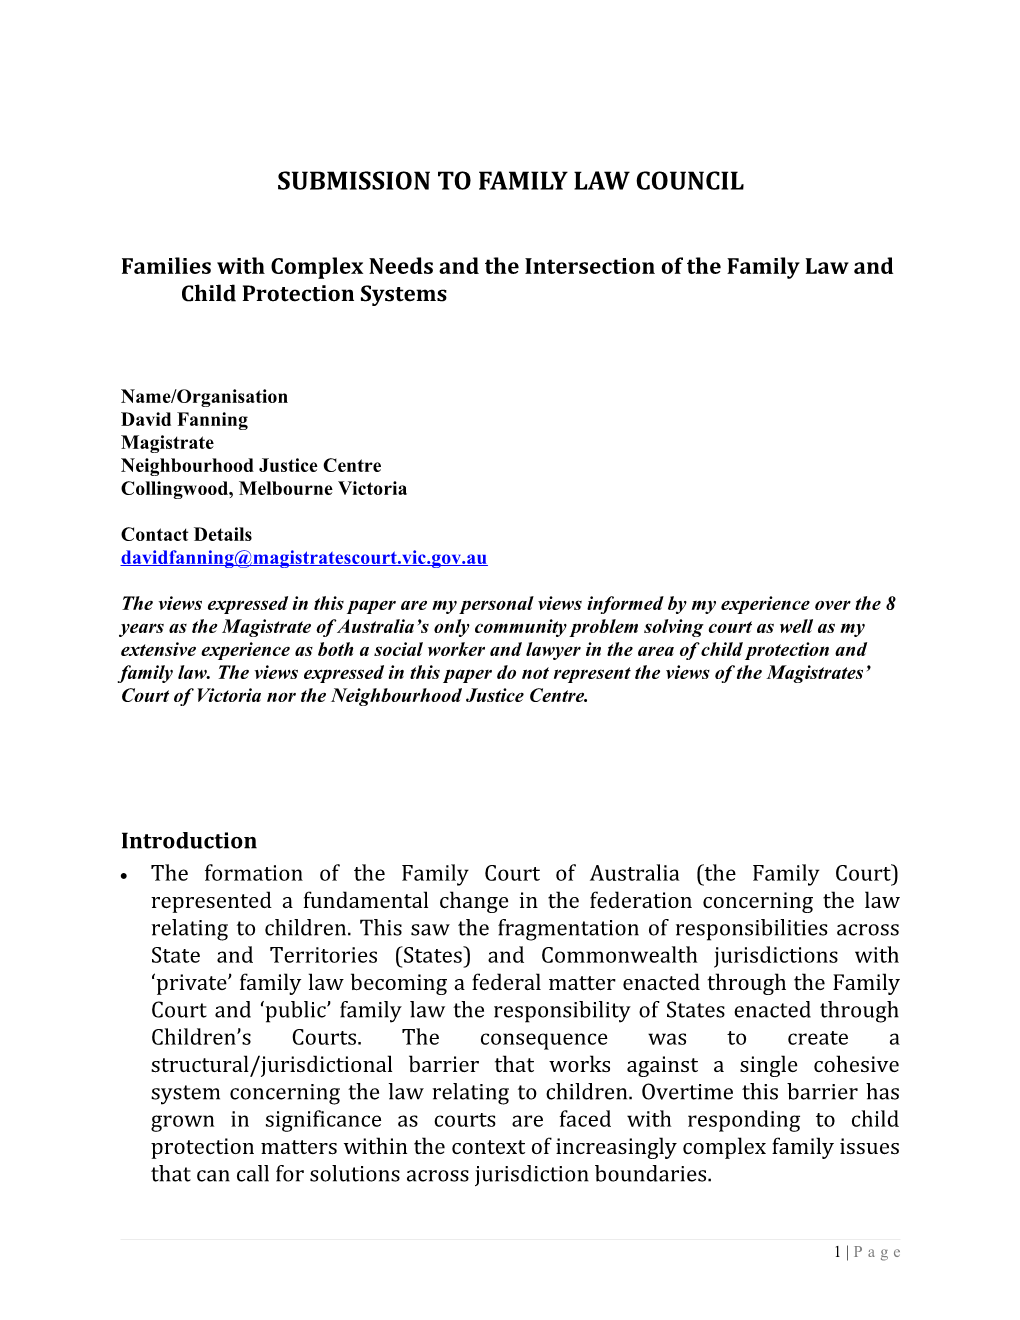 Submission to the Family Law Council - David Fanning (Magistrate)